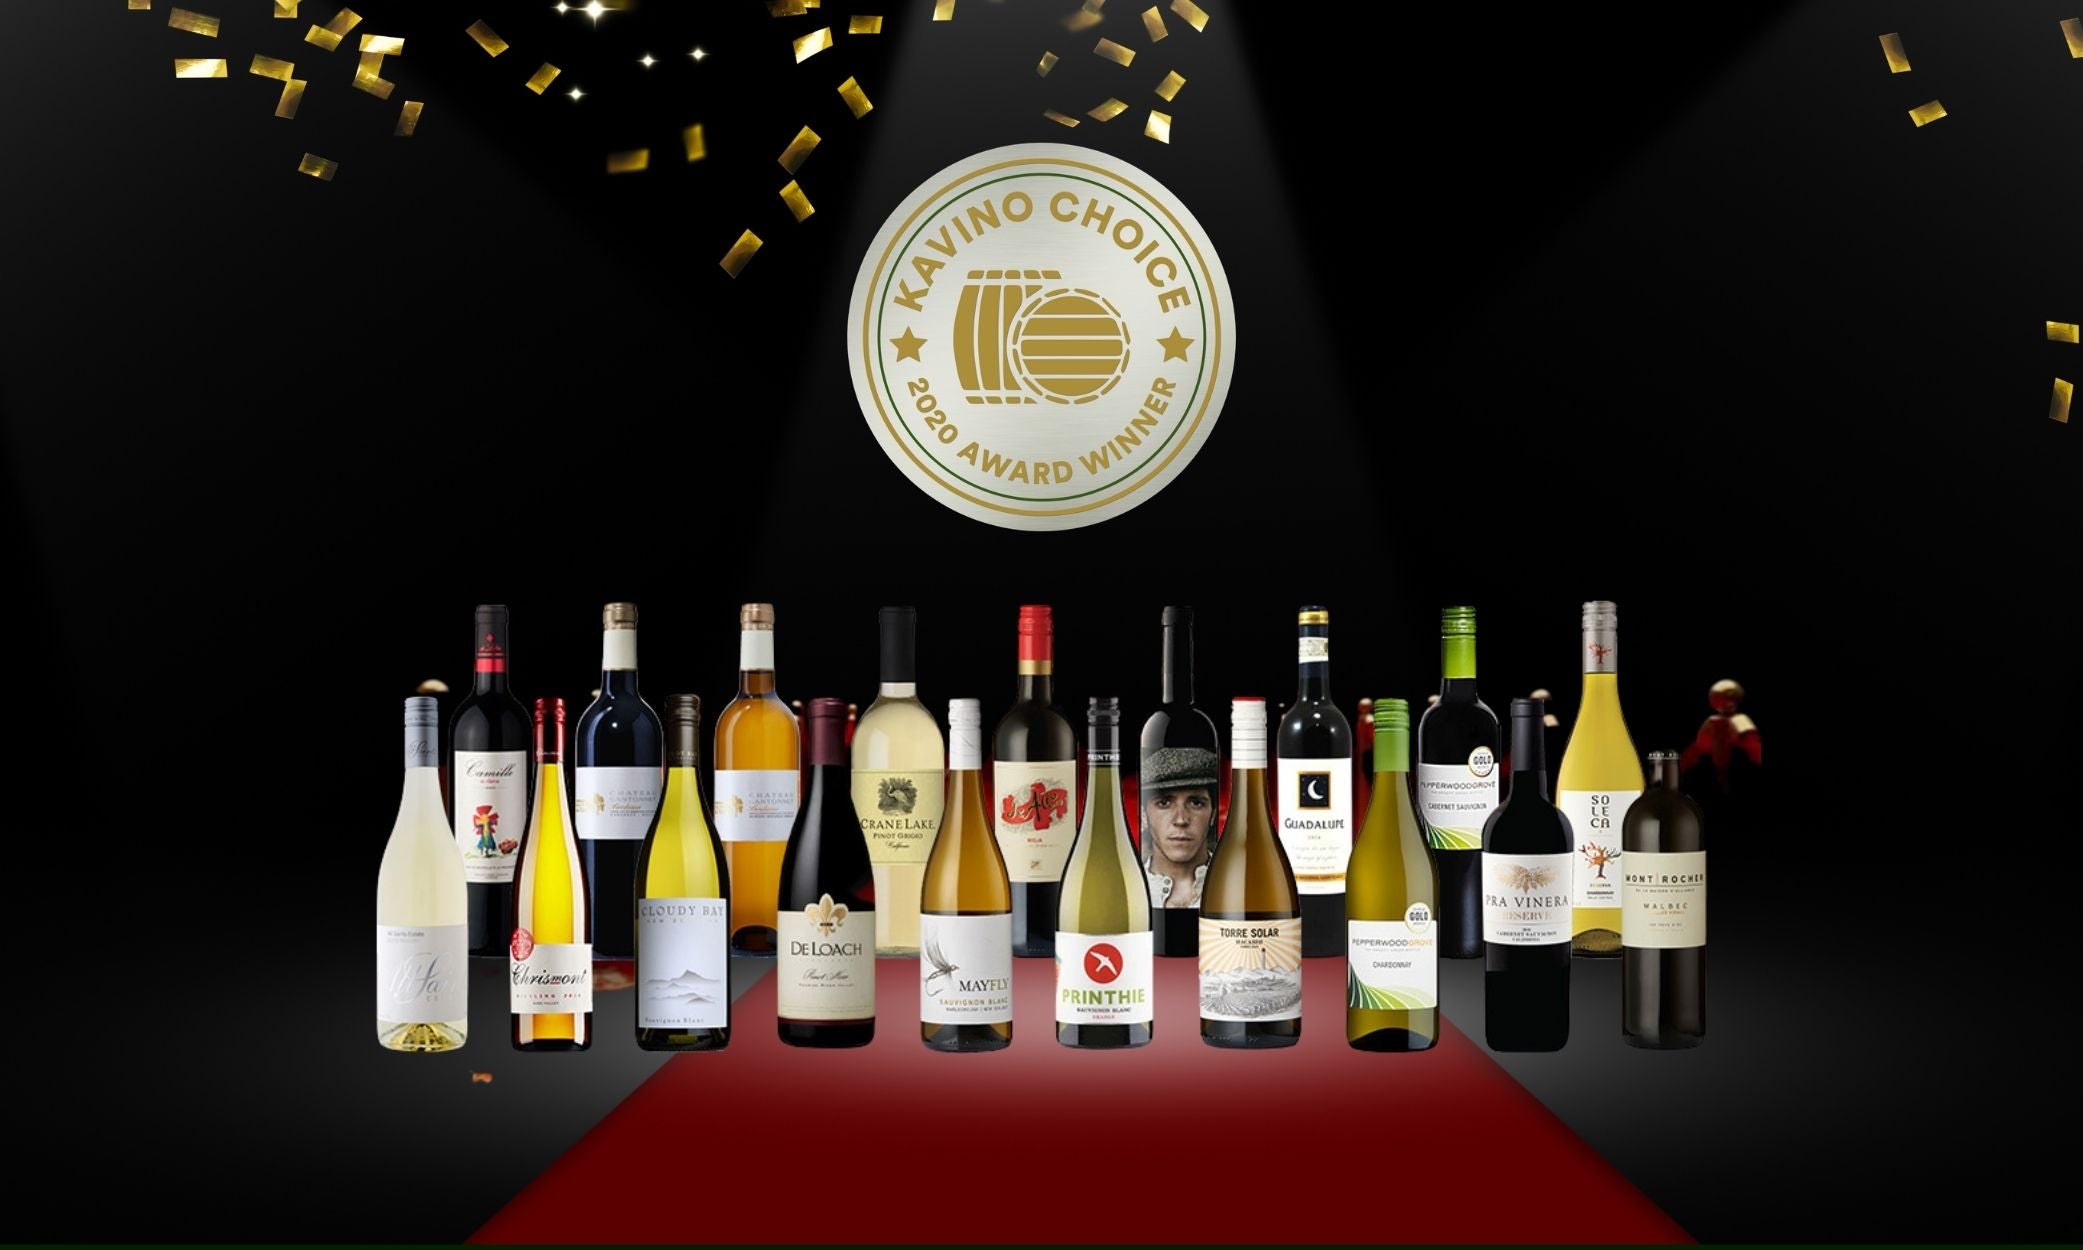 Winery.ph Announces the 12 Top-Selling Red and White Wines in the ‘Kavino Choice’ Awards